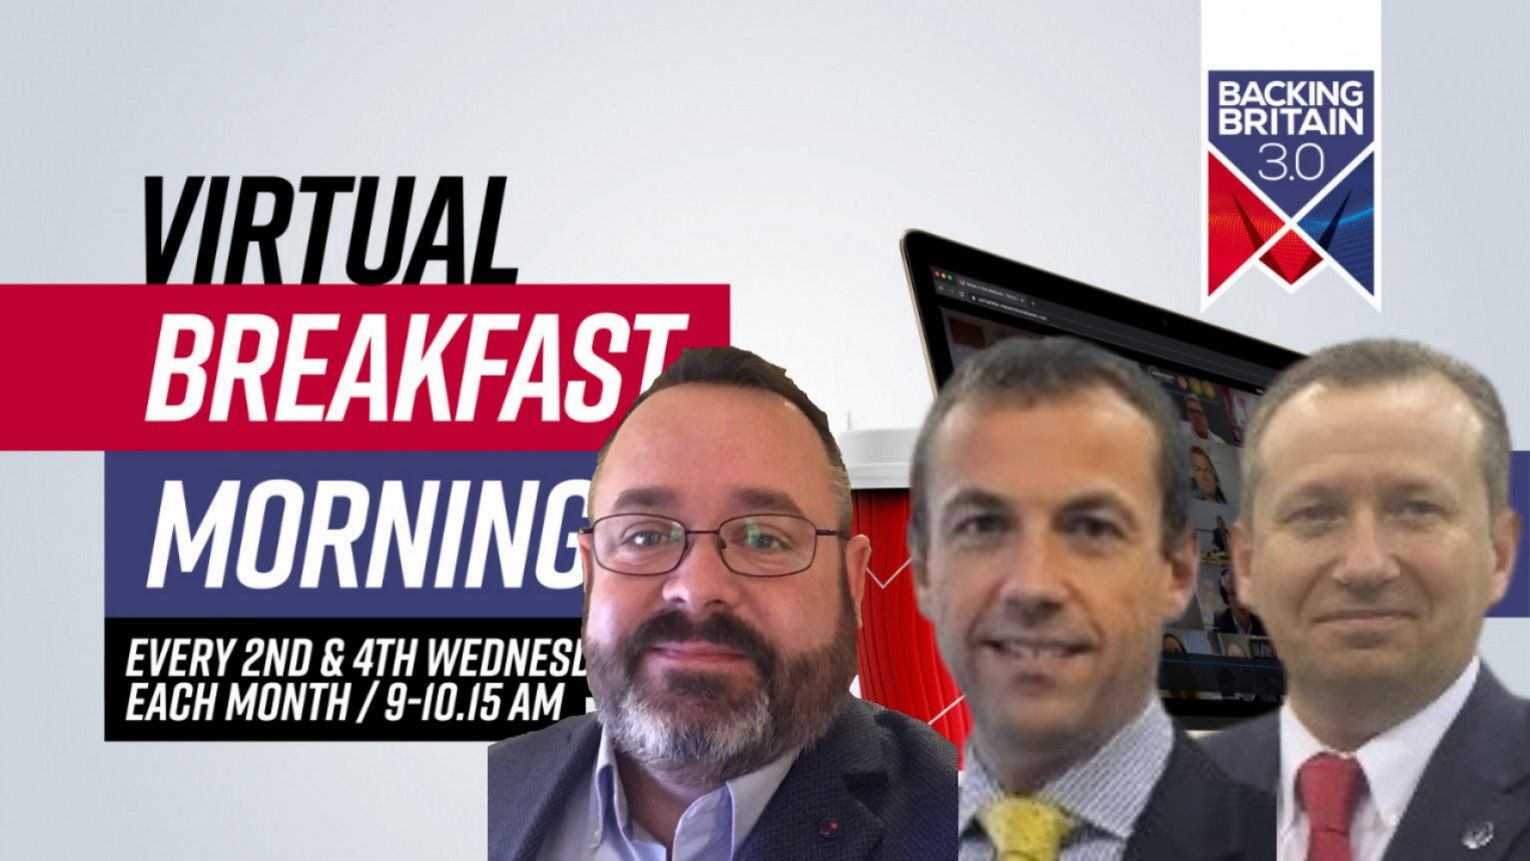 Backing Britain Virtual Breakfast Morning with SFS Group, ETG and Ontic